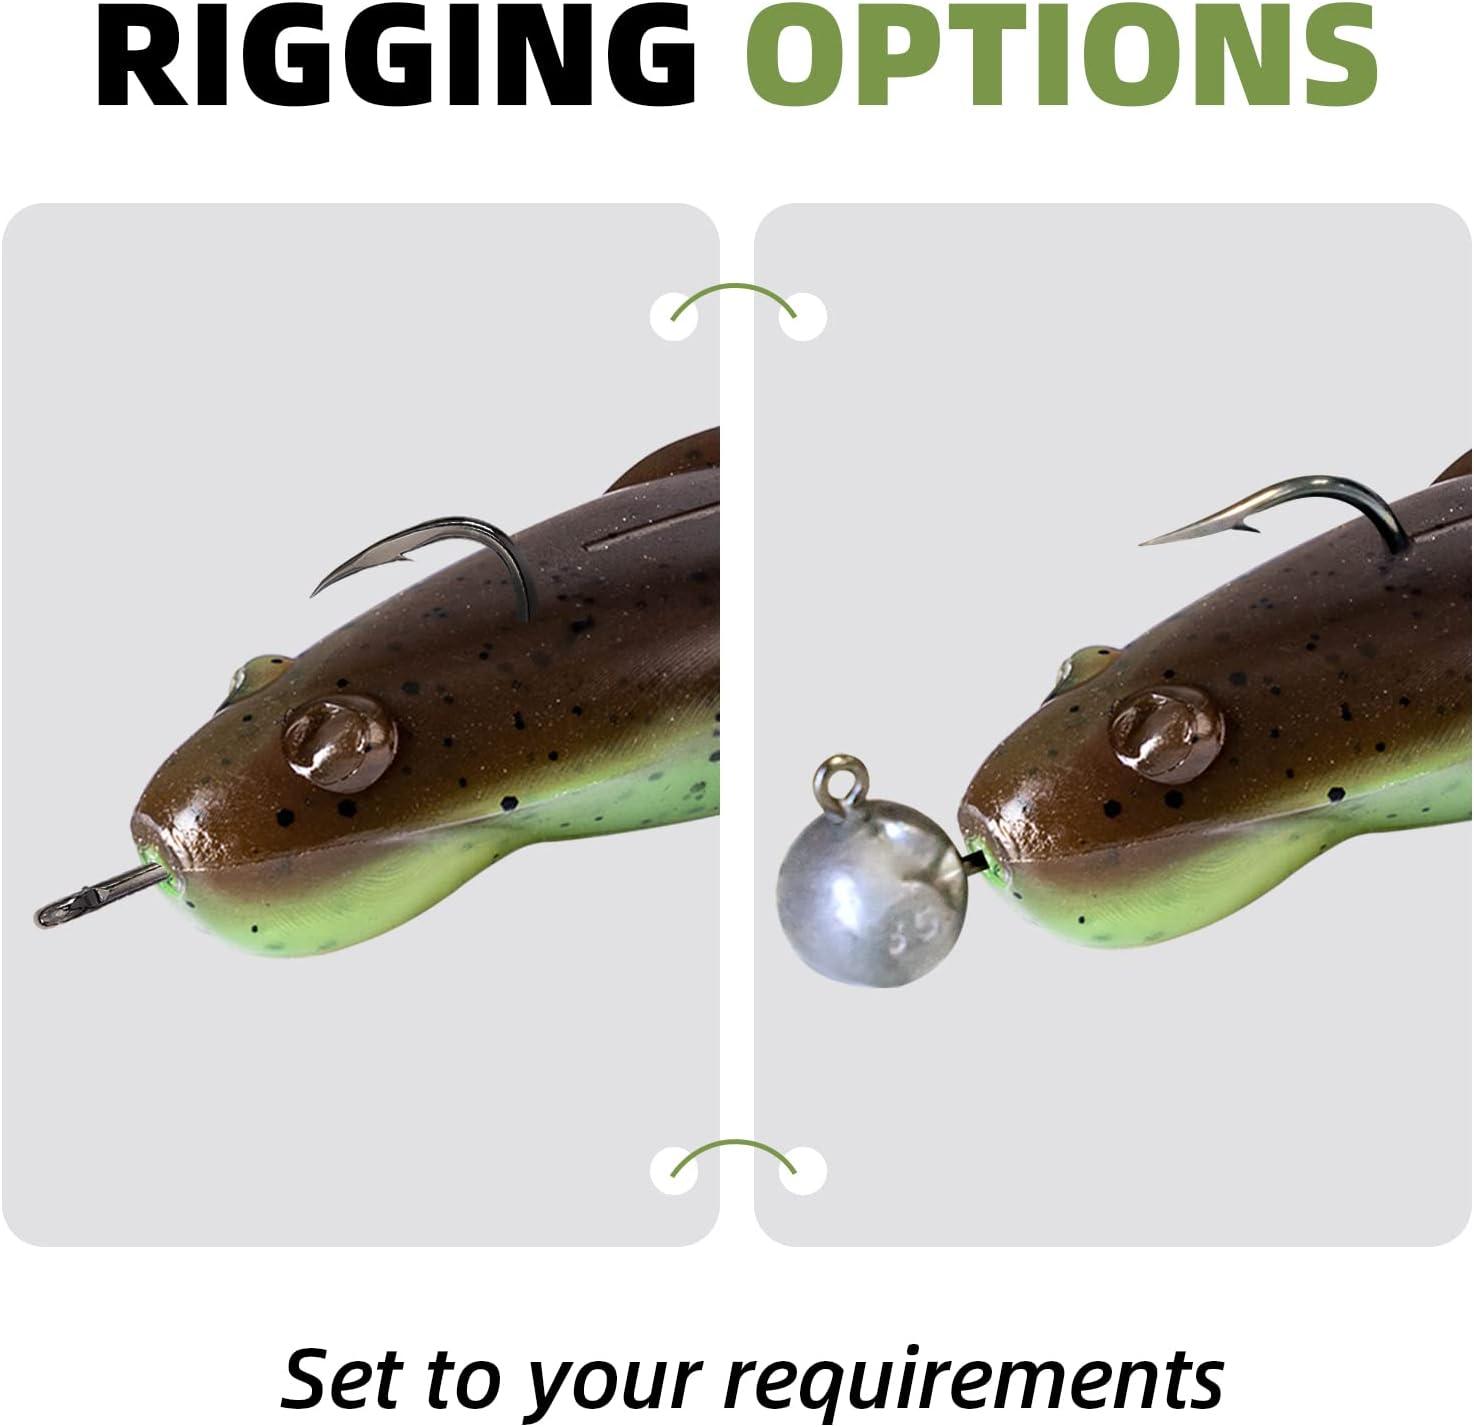 topwater frog, topwater frog Suppliers and Manufacturers at